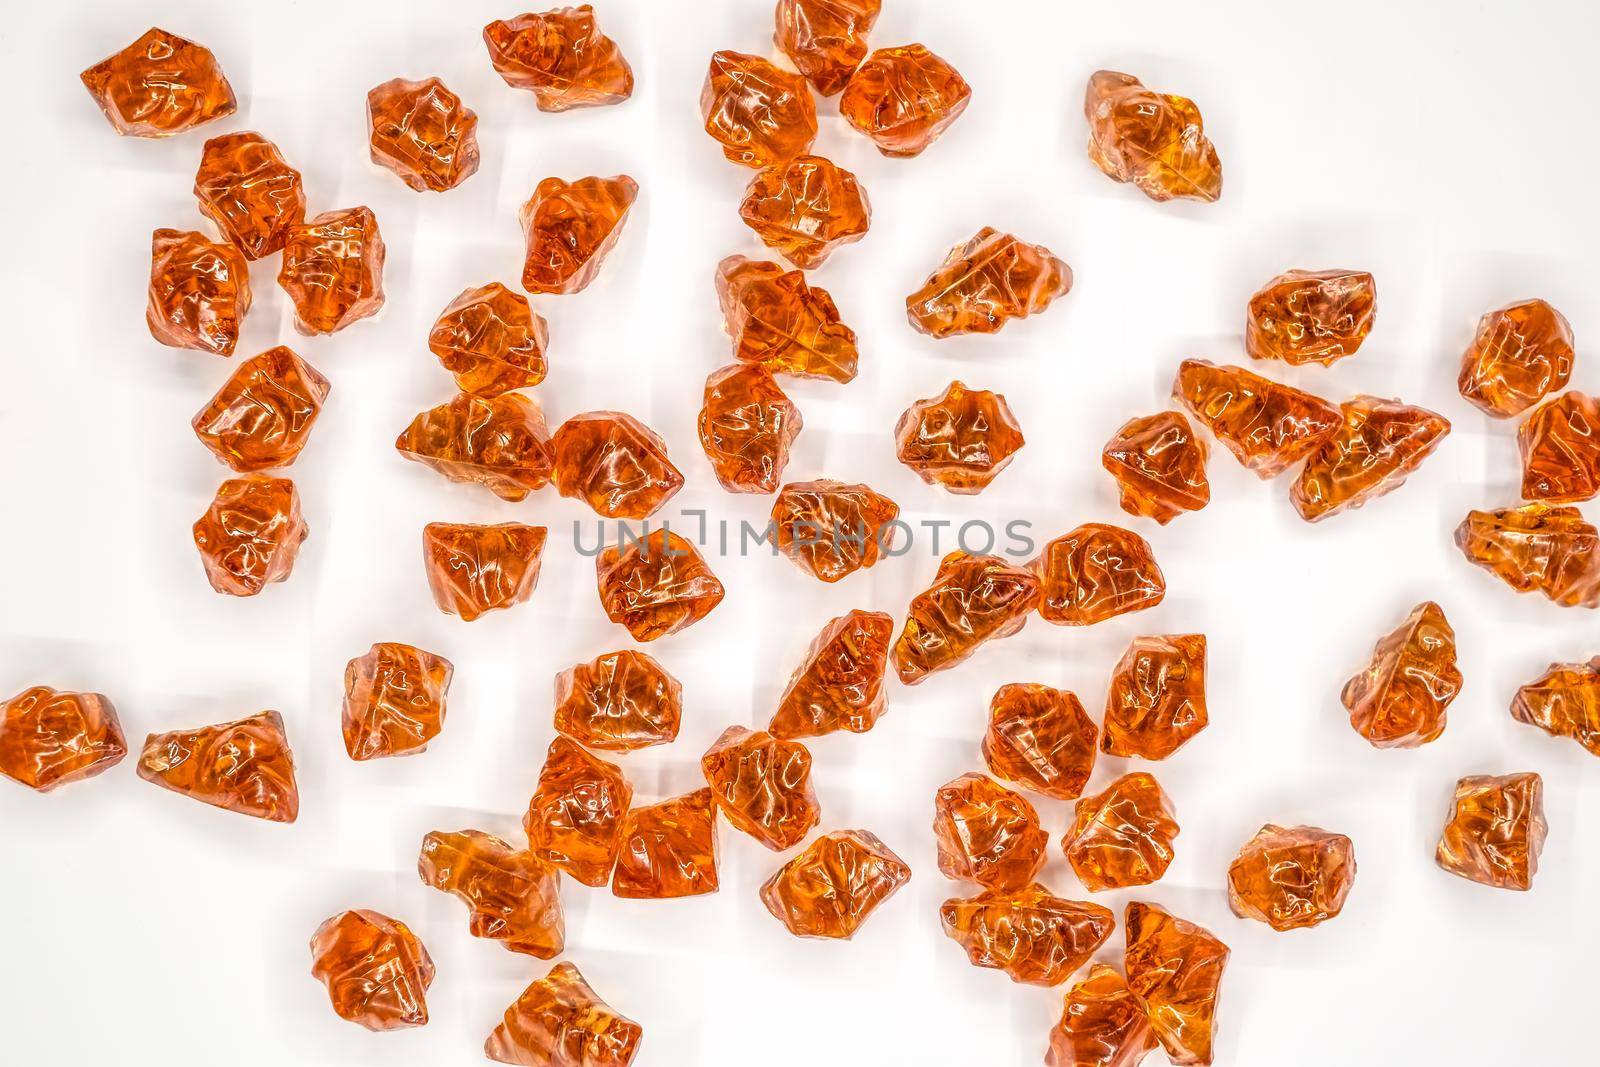 Baltic amber stones rectangular lie on a white background